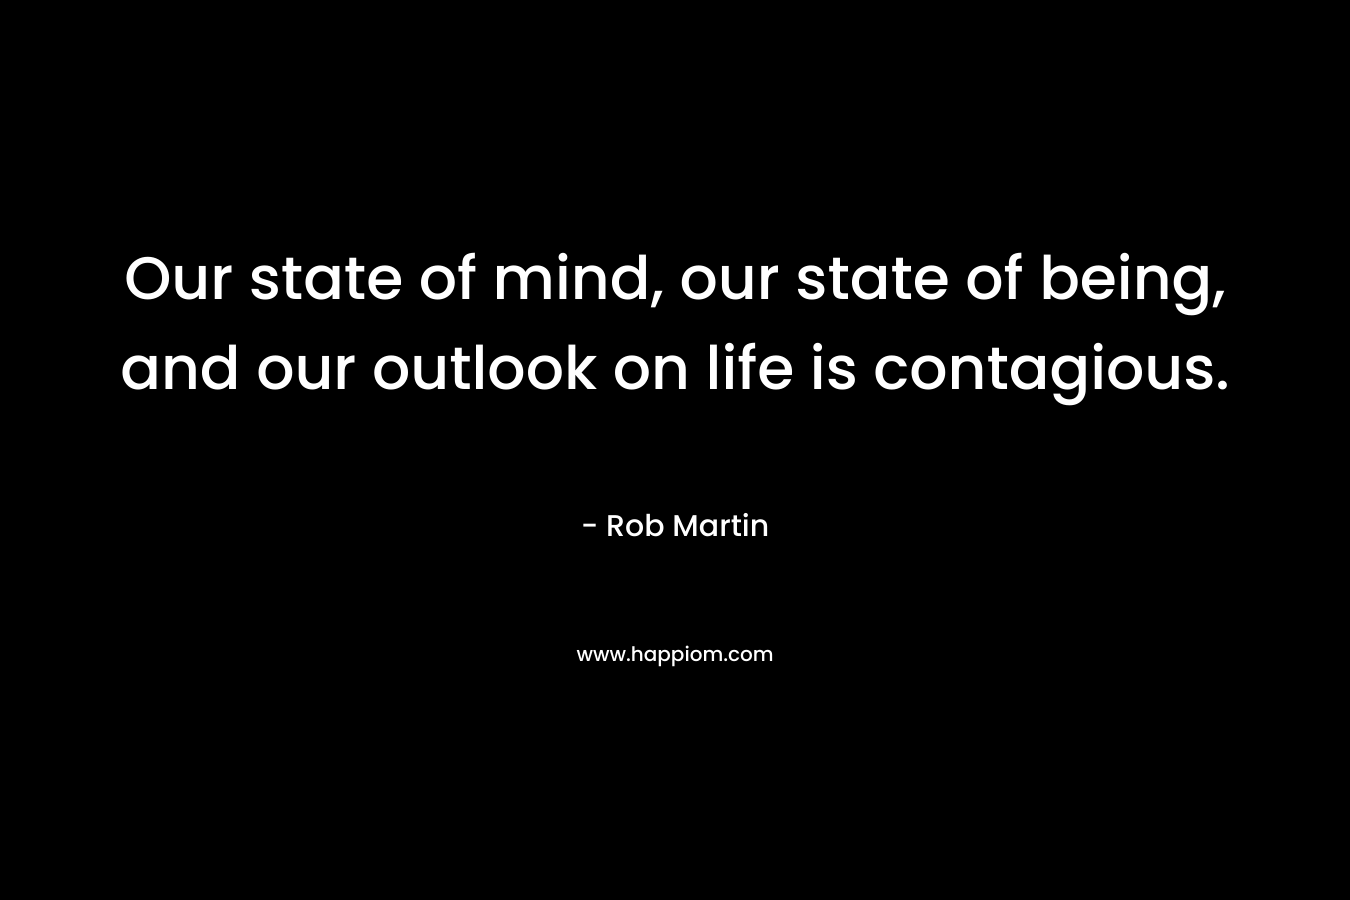 Our state of mind, our state of being, and our outlook on life is contagious.